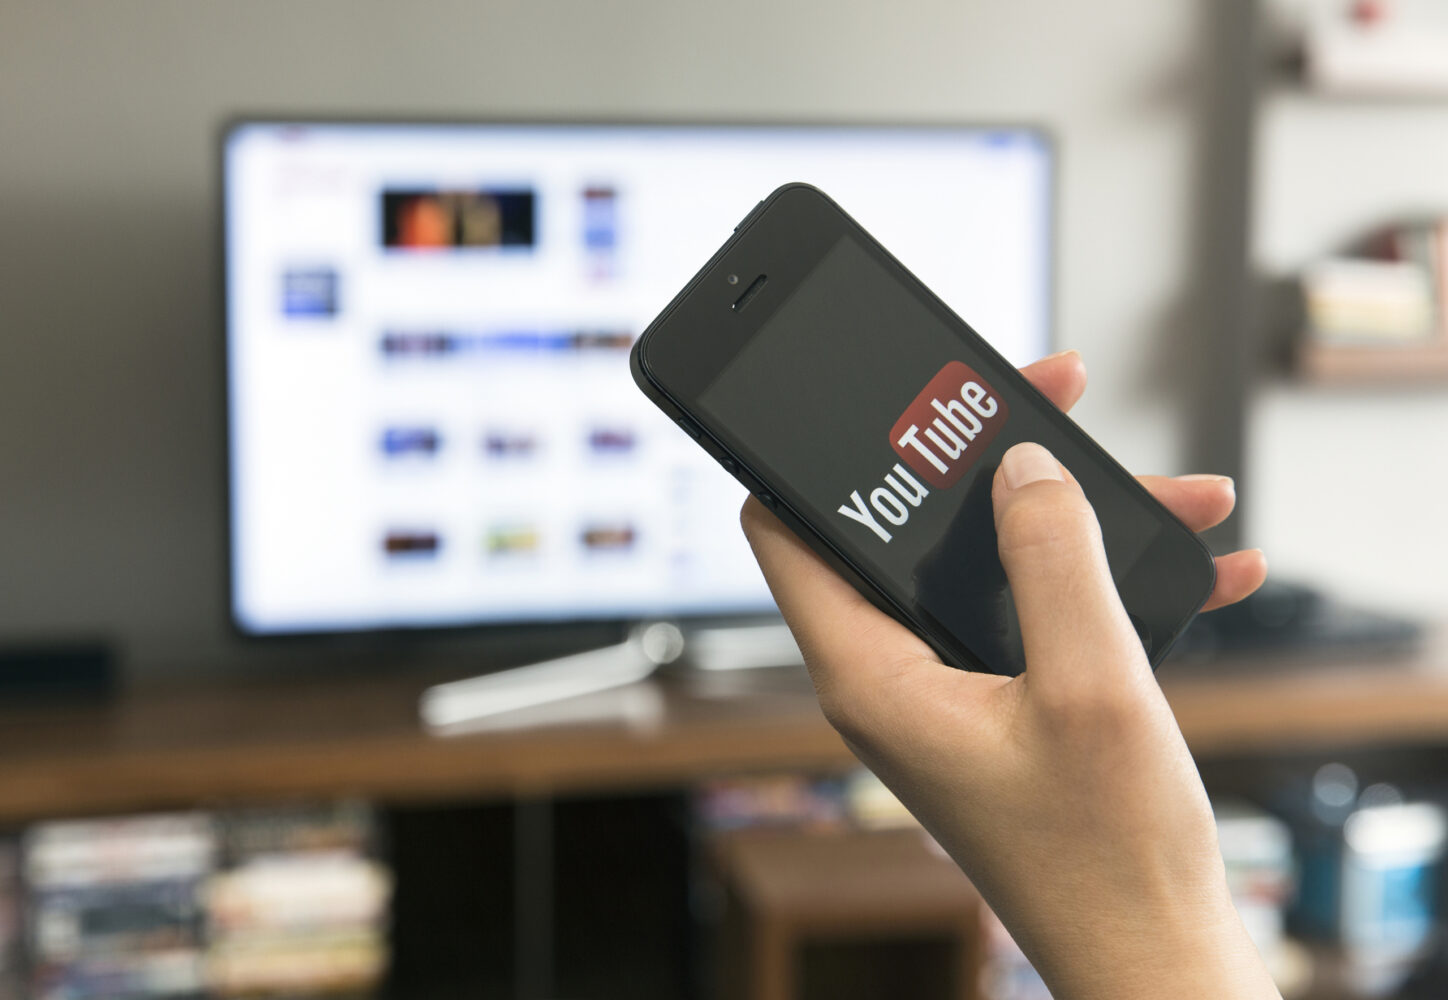 What Do People Like to Watch on YouTube? (And What You Should Know as a Brand)